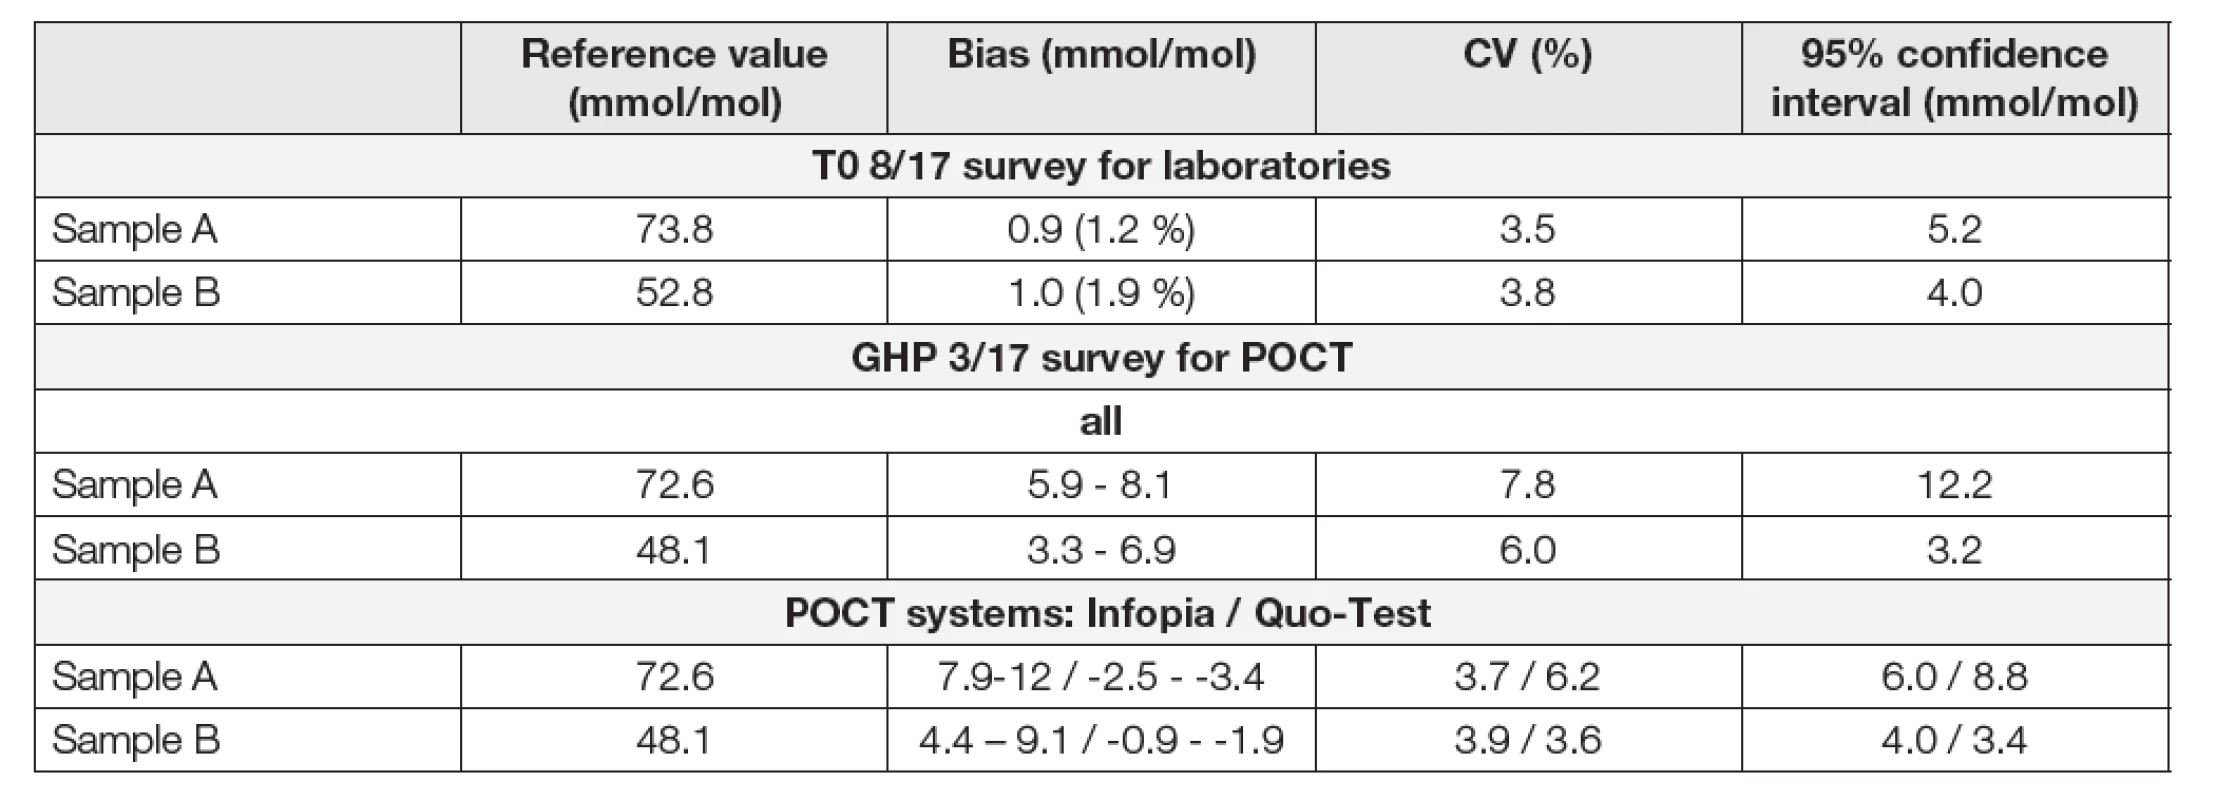 EQA programs for assessment of HbA<sub>1c</sub> in HPLC method in laboratories with using the native blood samples T08/17
and GHP 3/17 in POCT systems